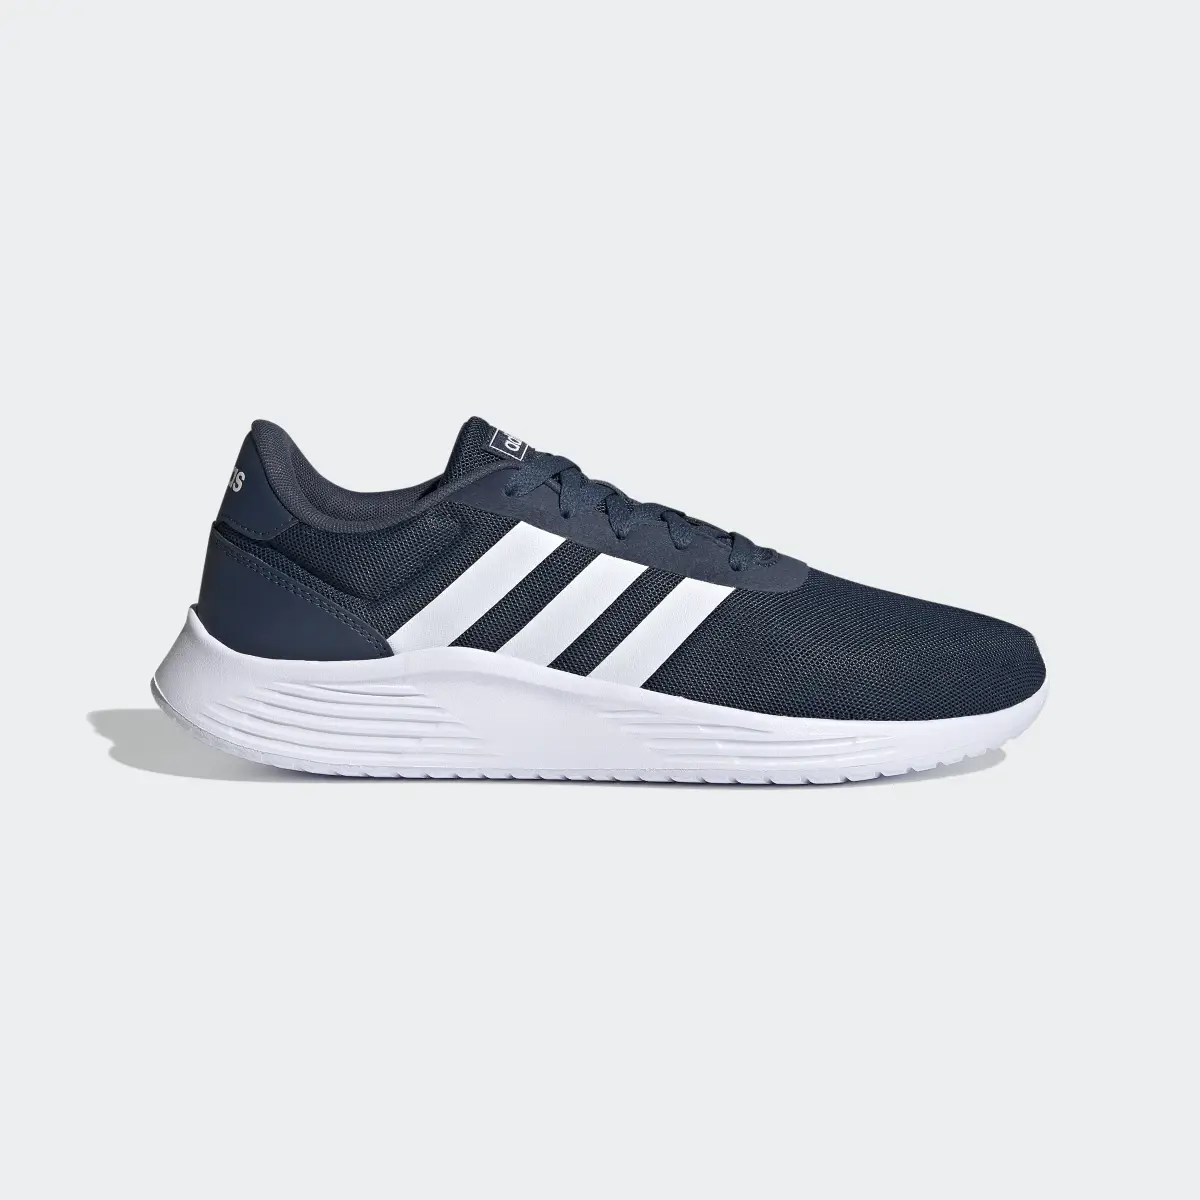 Adidas Lite Racer 2.0 Shoes. 2